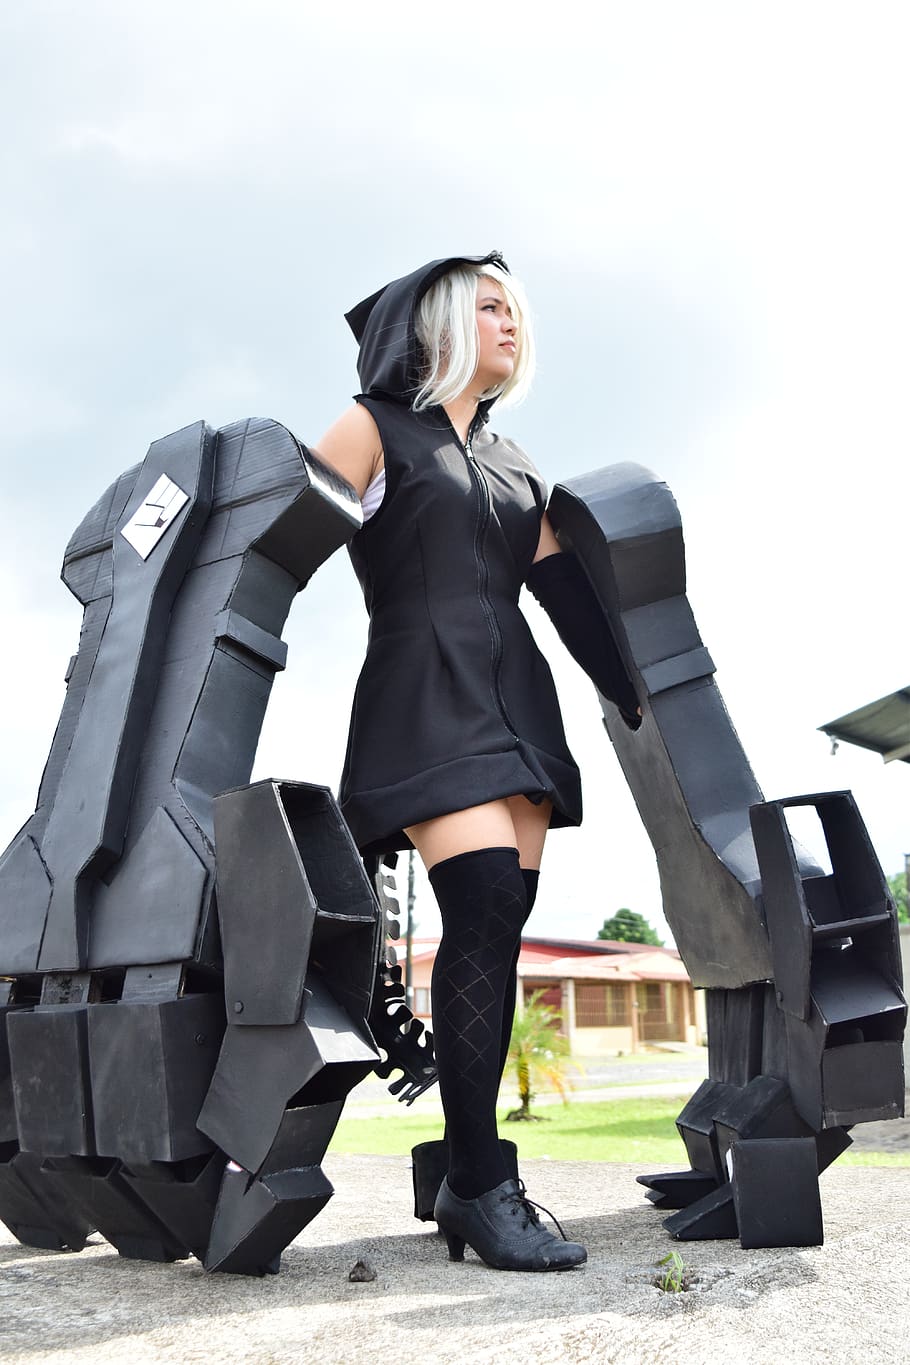 25 GREATEST Cosplay Ideas for Girls